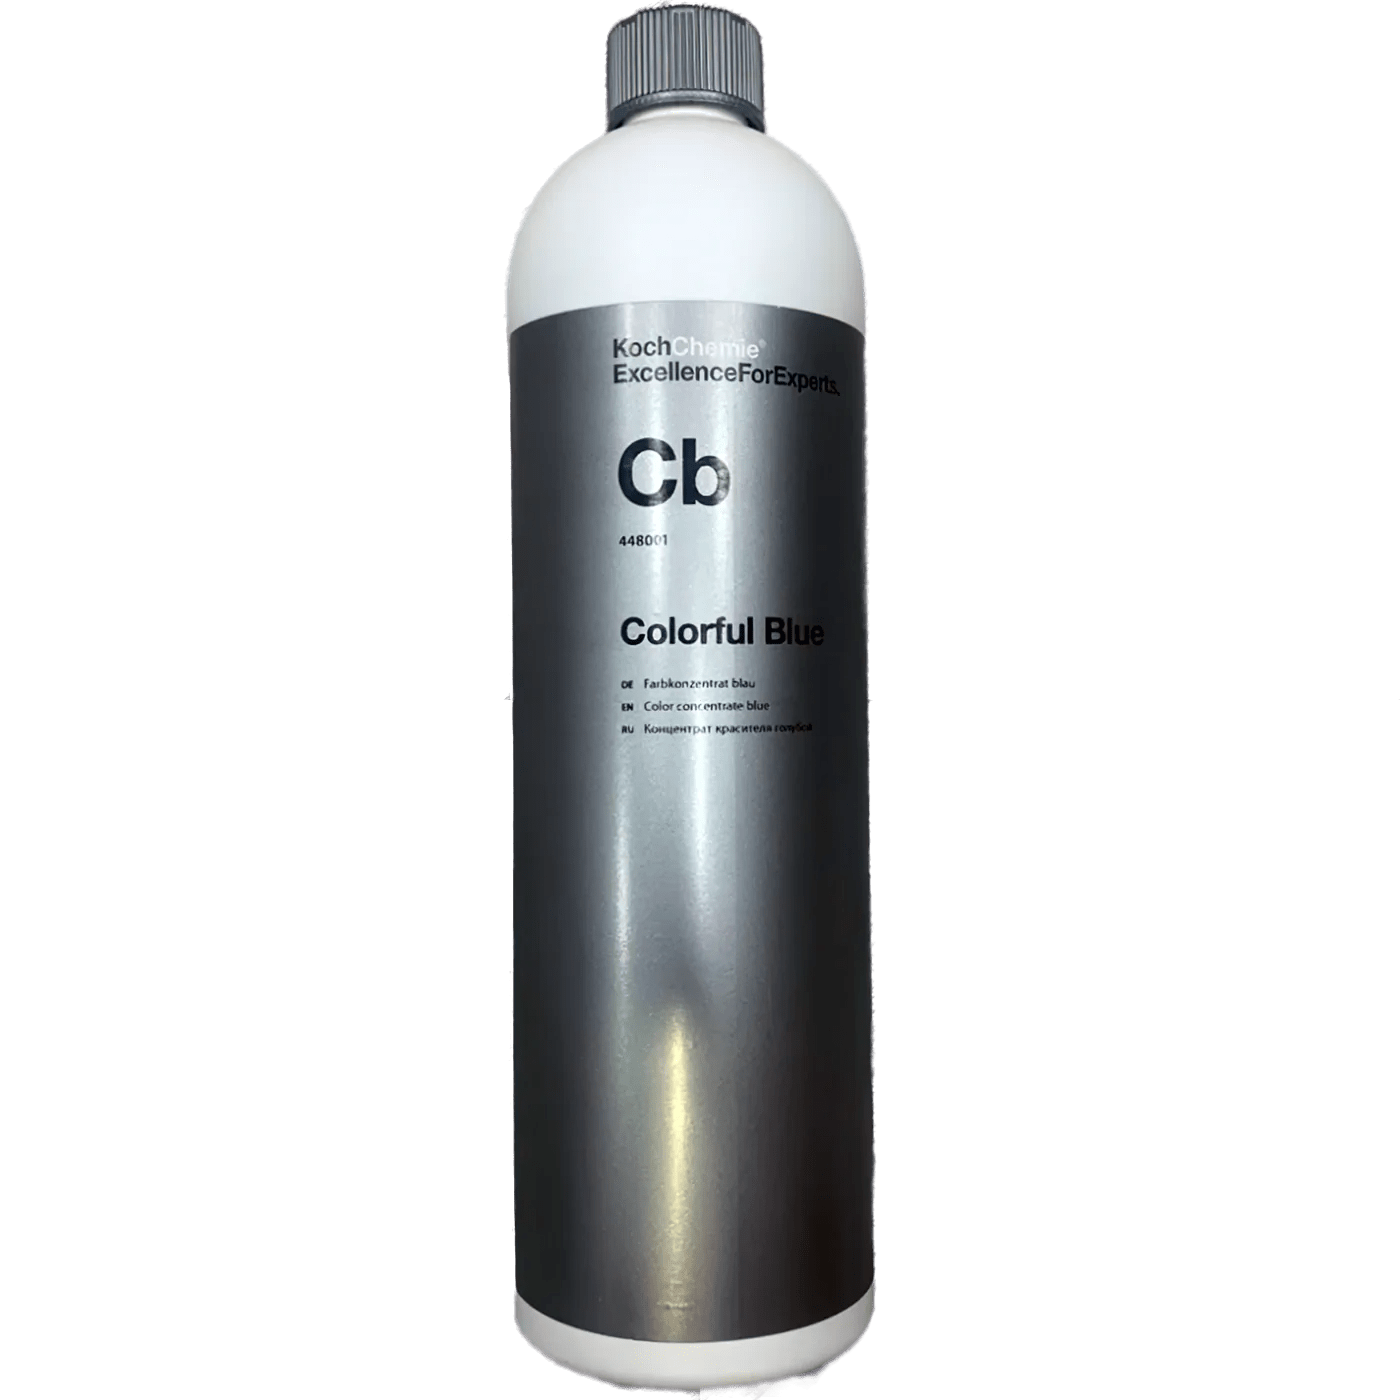 Koch-Chemie - Quick & Shine Allround Finish Spray - Cleans, Maintains, and  Preserves All Smooth and Painted Surfaces; Ideal for Quick Finishing and